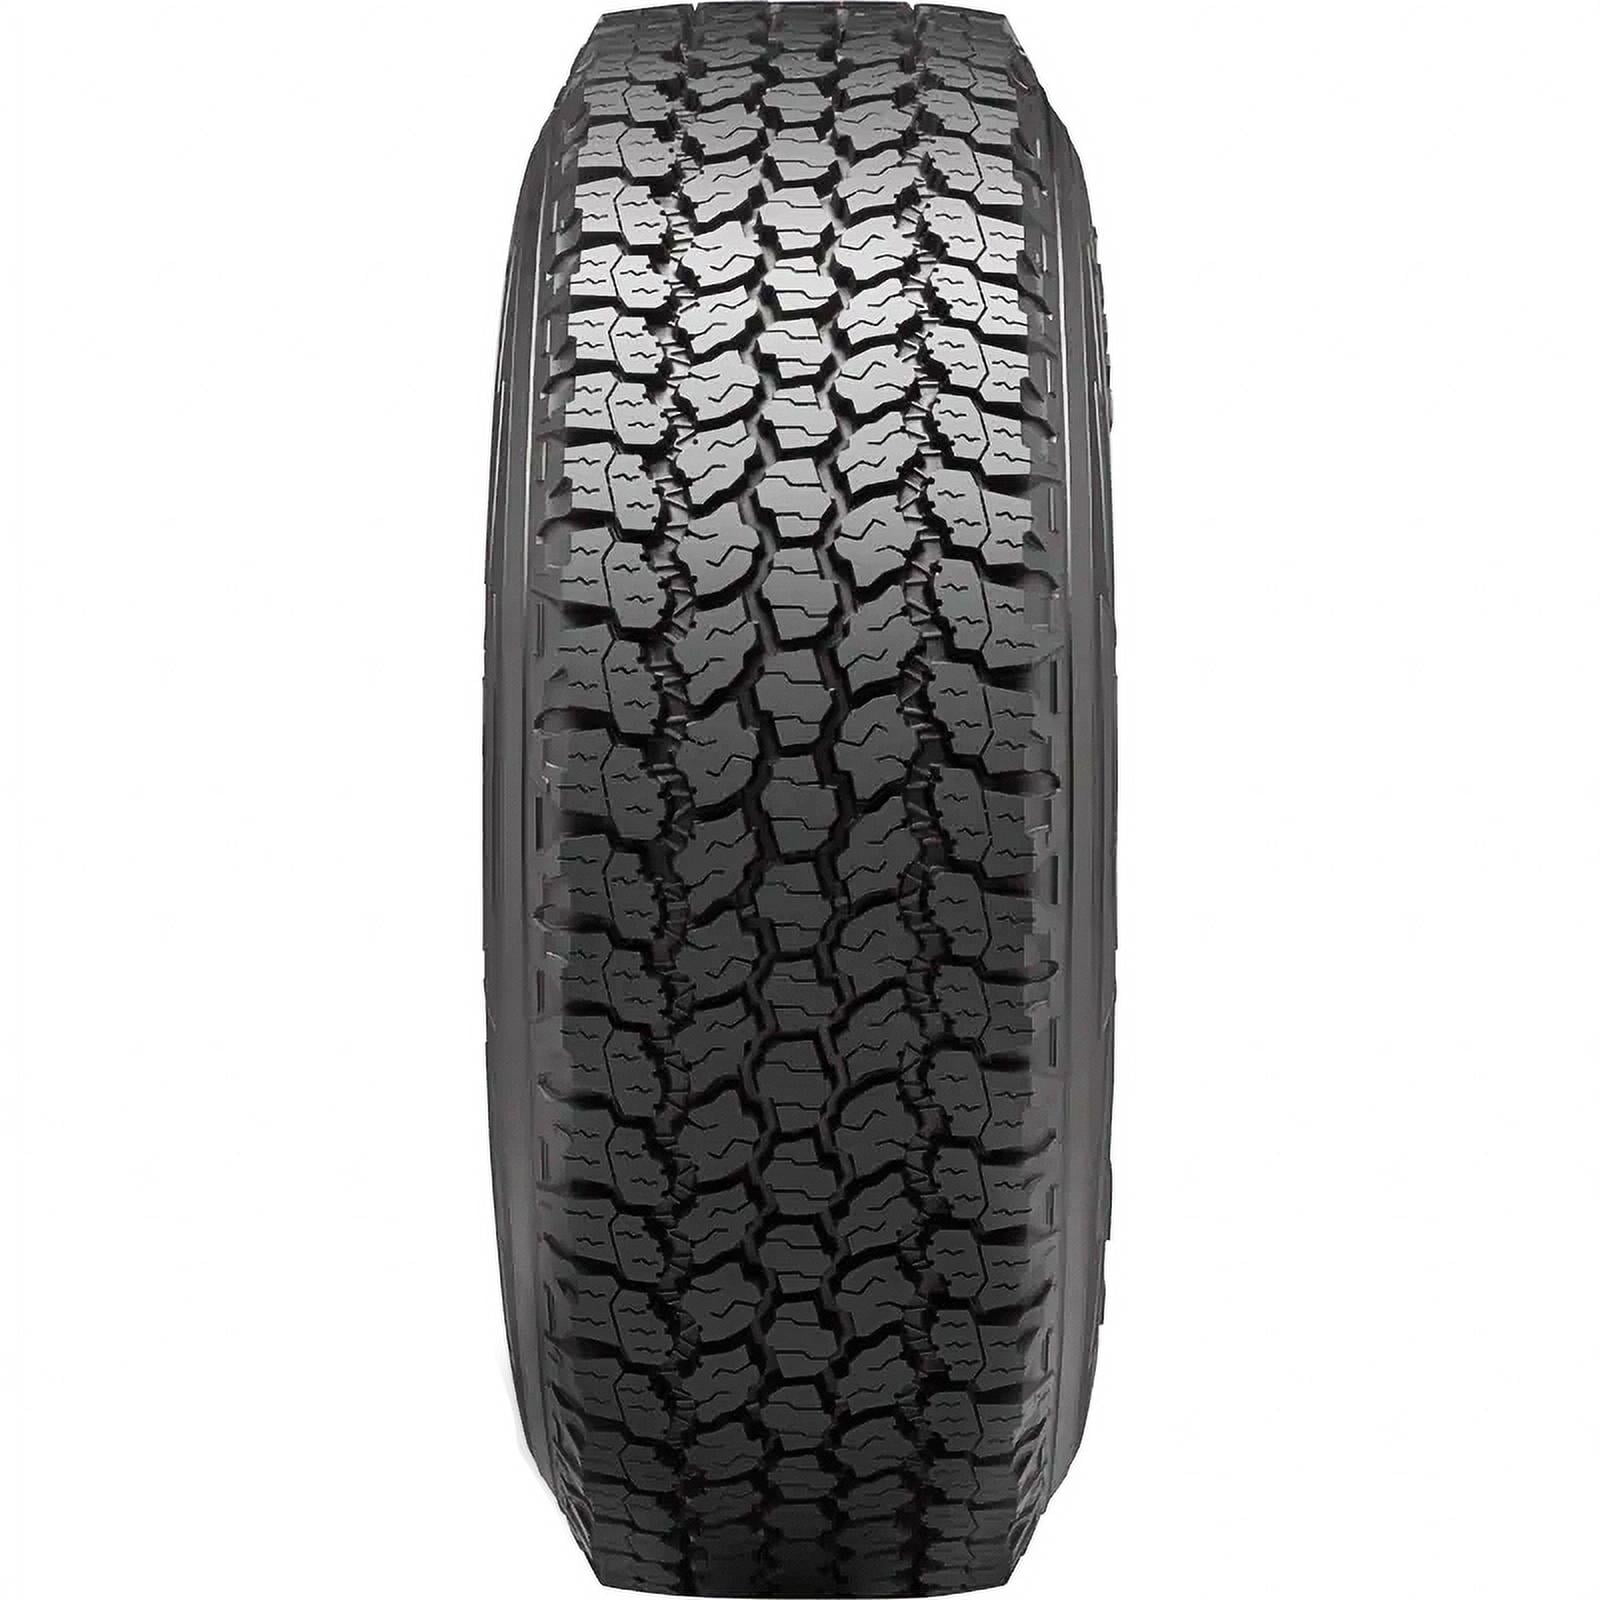 Buy Goodyear Wrangler All-Terrain Adventure with Kevlar 265/75R16 116 T Tire  Online at Lowest Price in Ubuy Georgia. 43085915